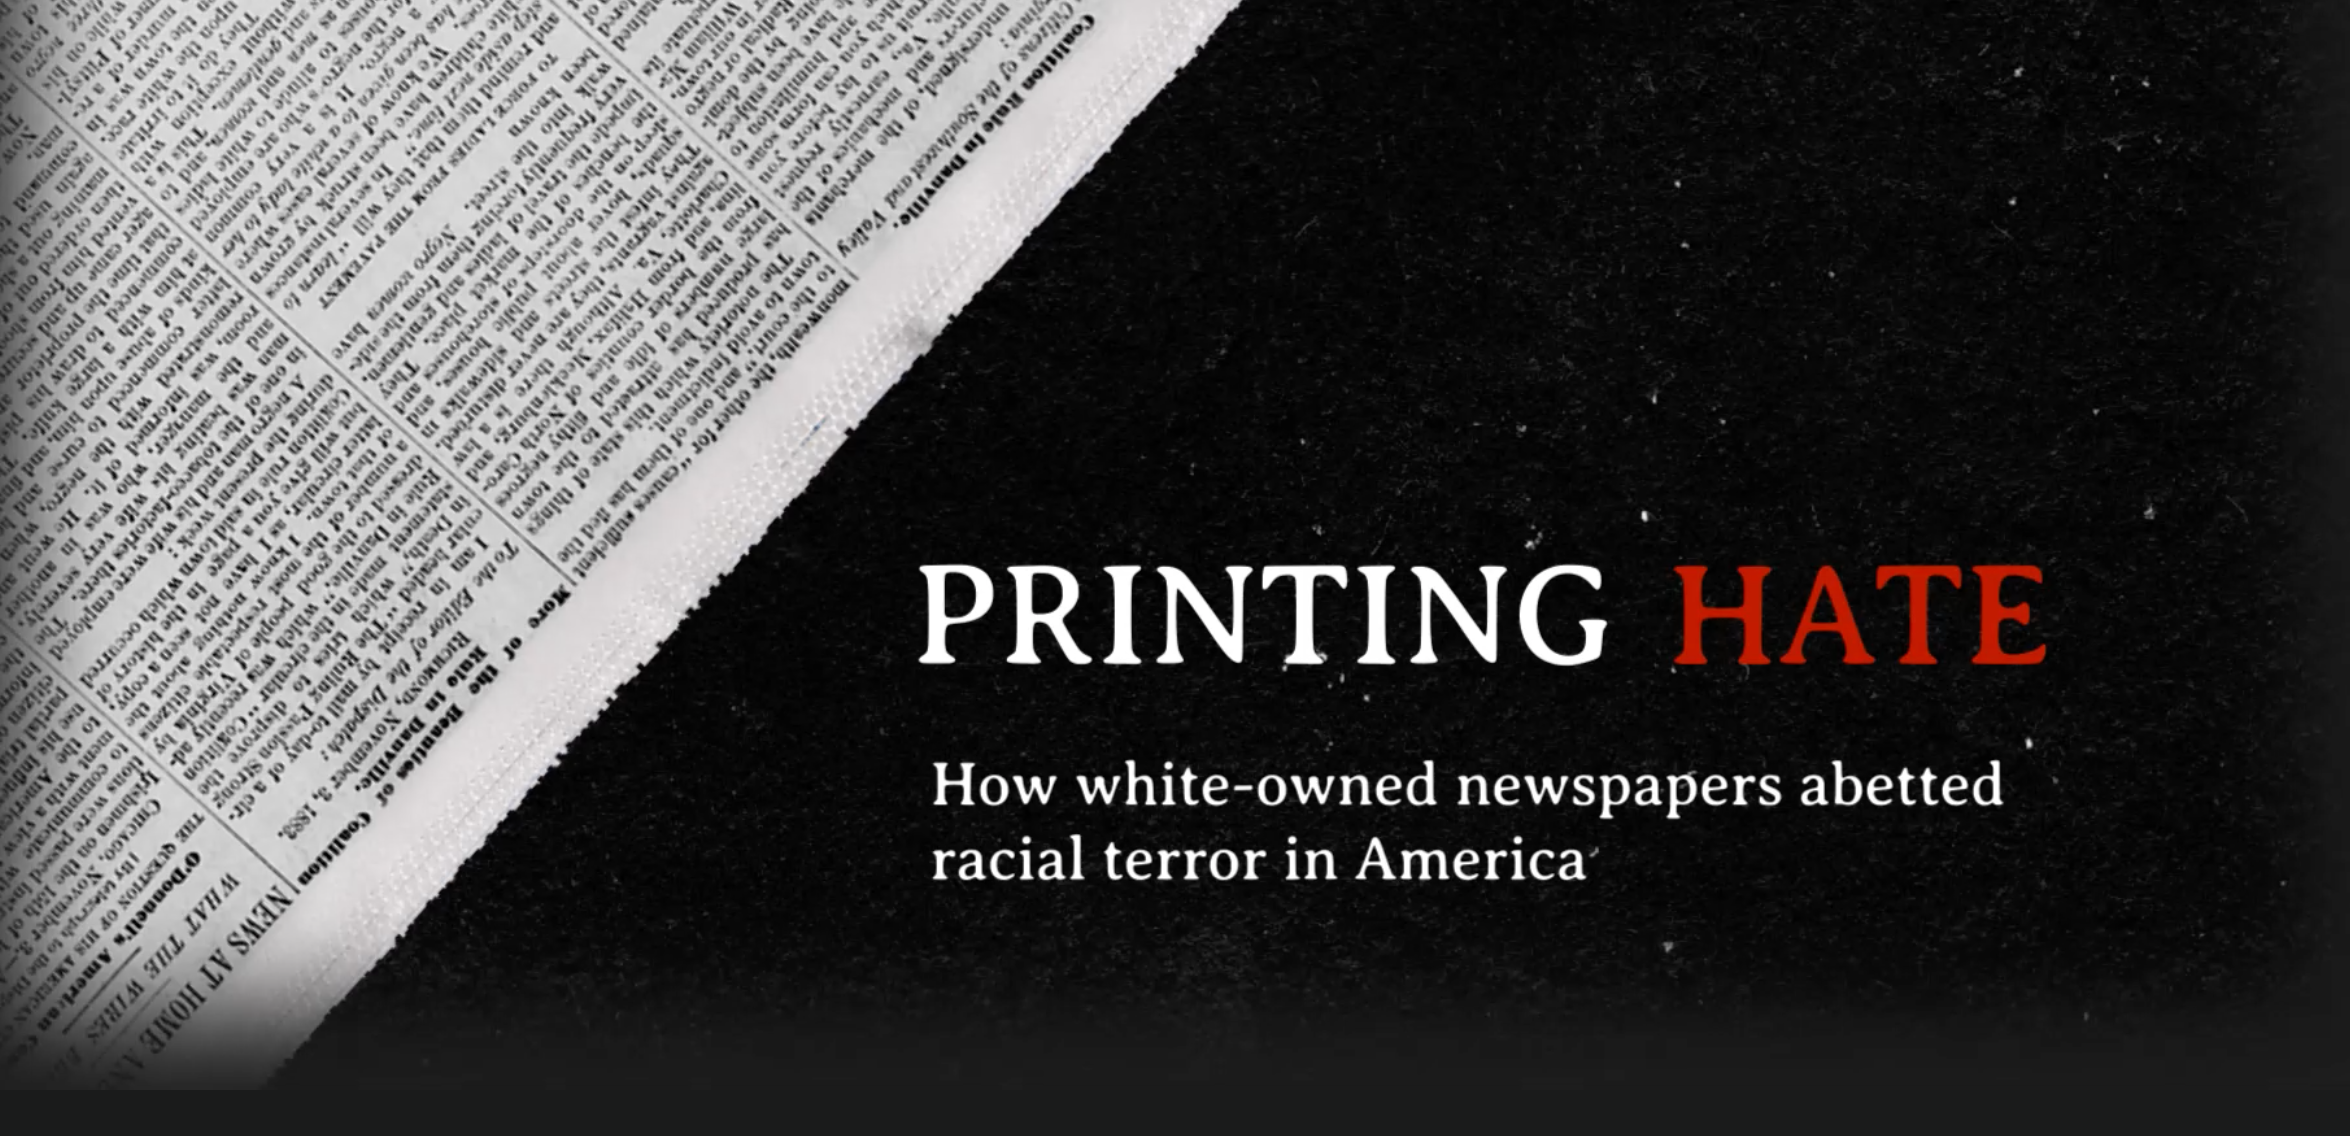 Printing Hate - How white-owned newspapers incited racial terror in America - Printing Hate